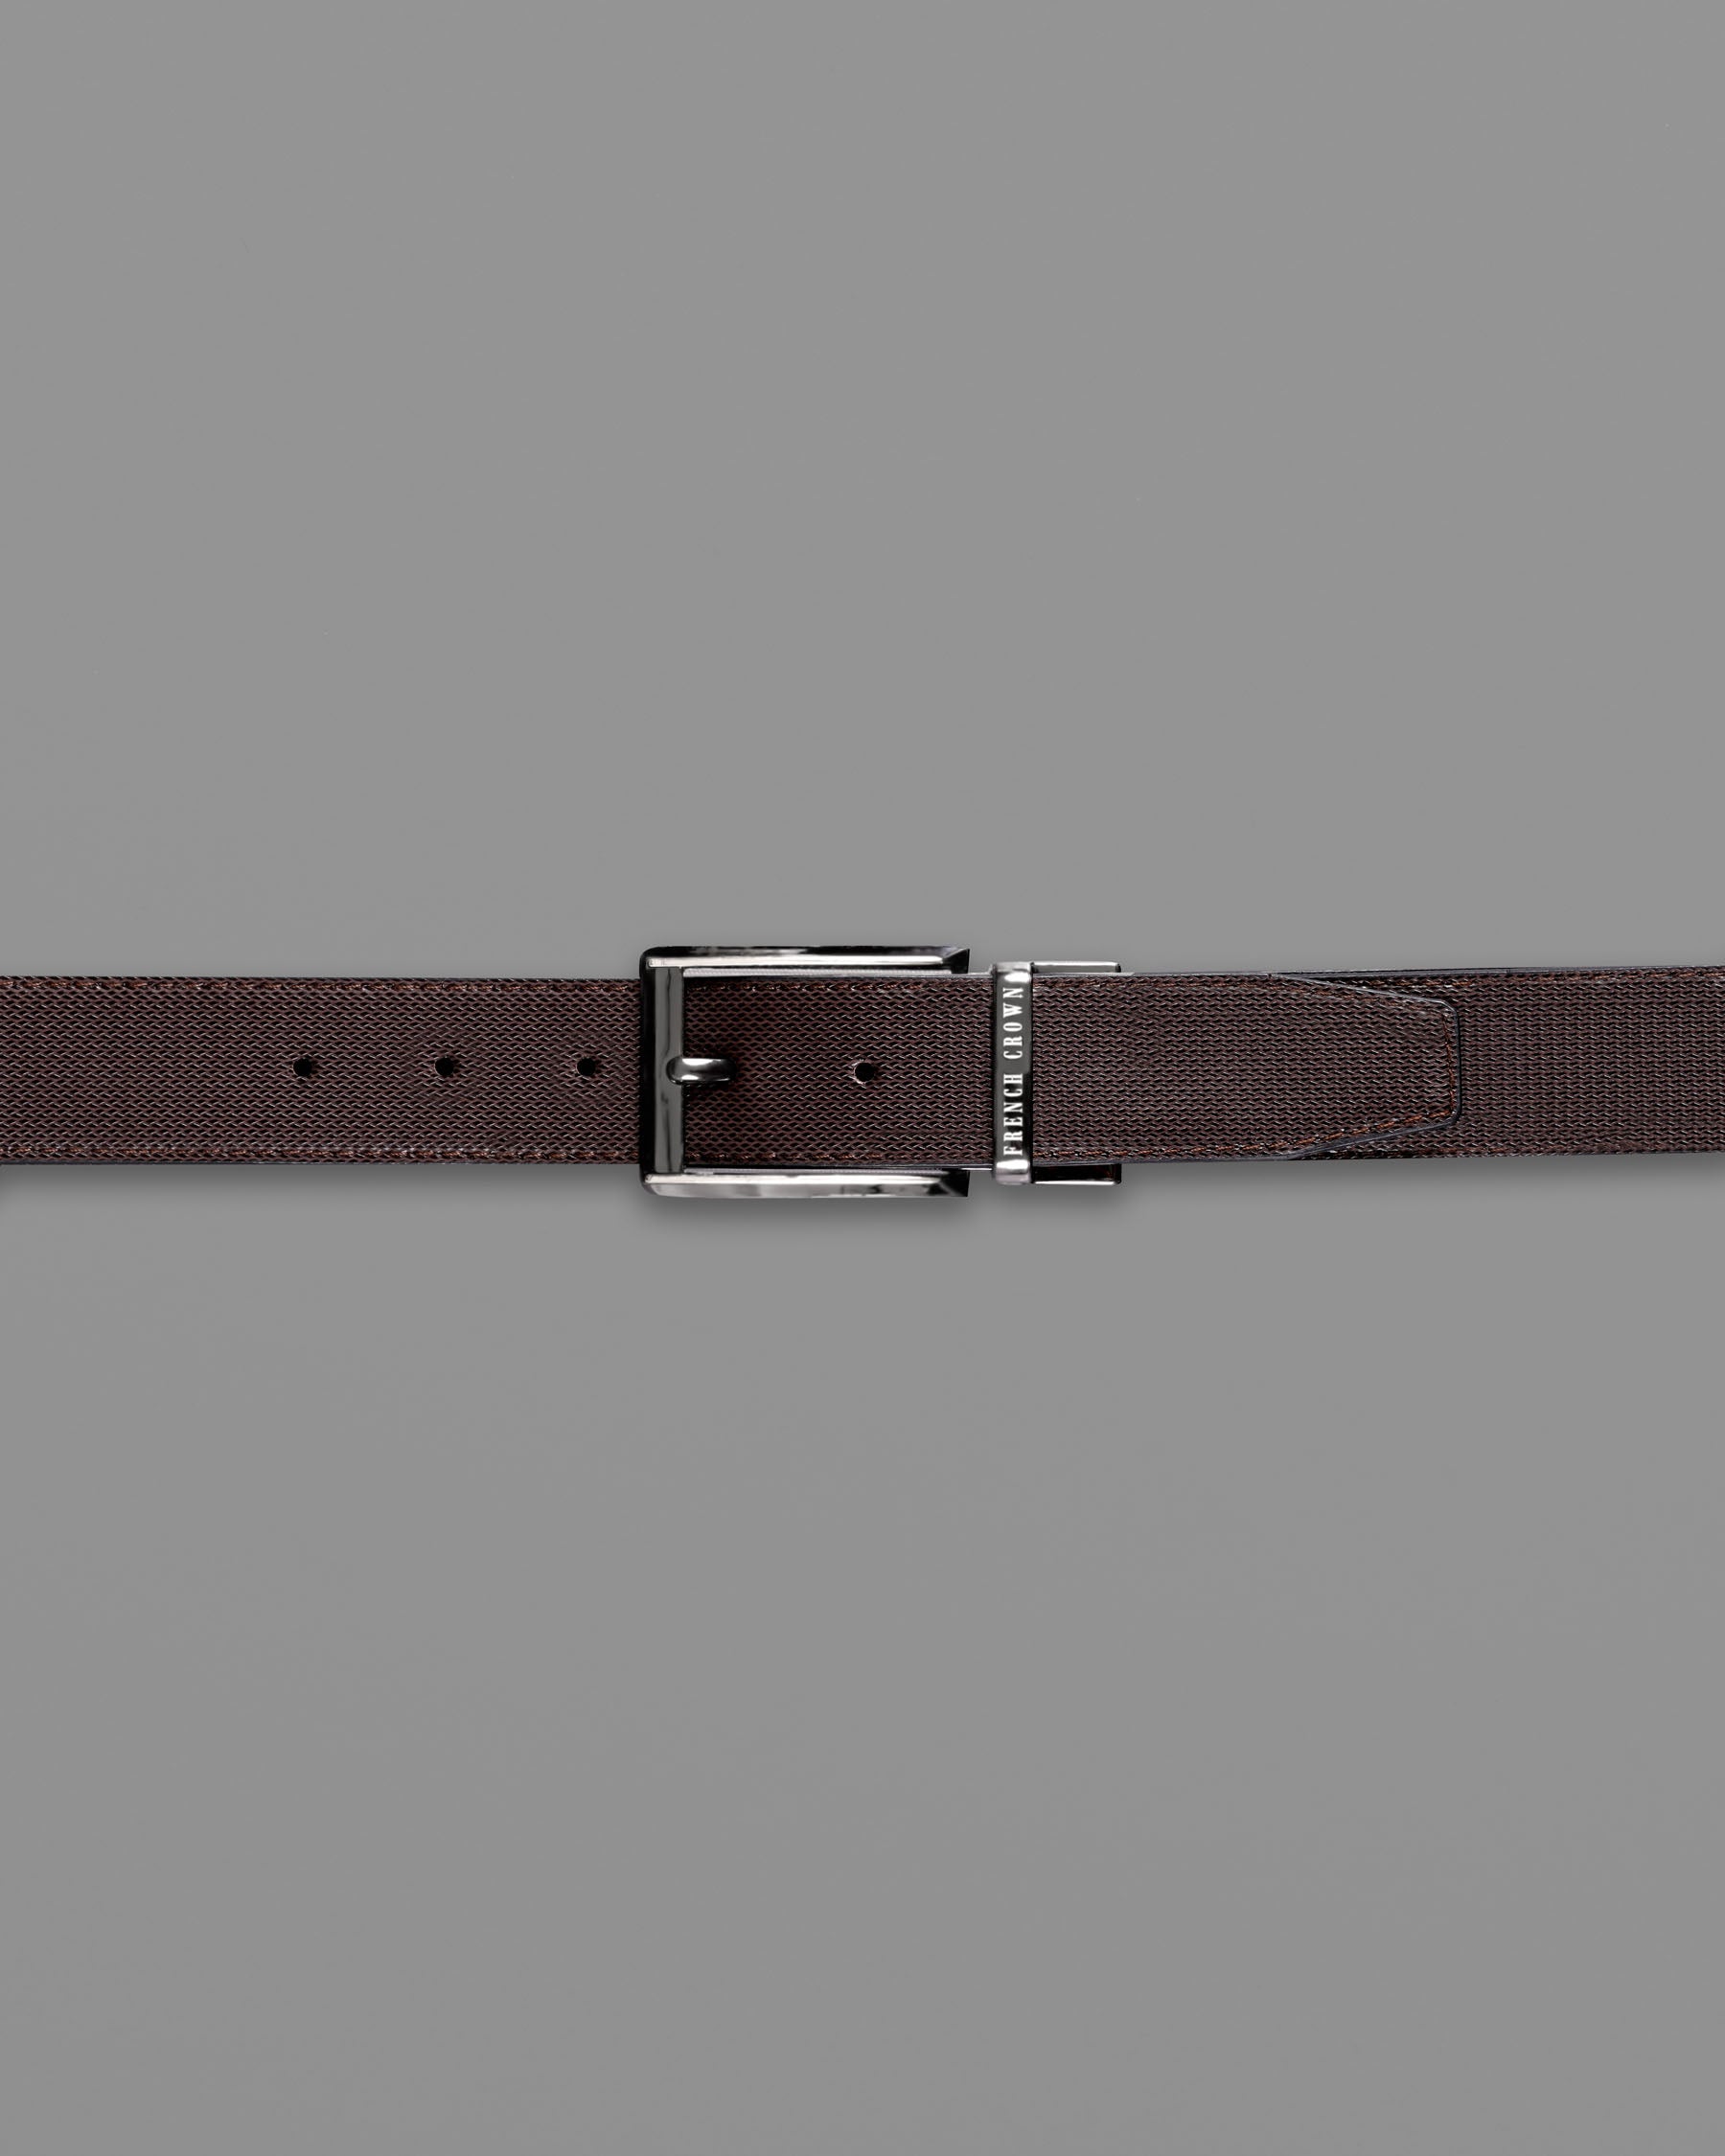 Glossy Grey with Golden buckled Reversible Black and Brown Vegan Leather Handcrafted Belt